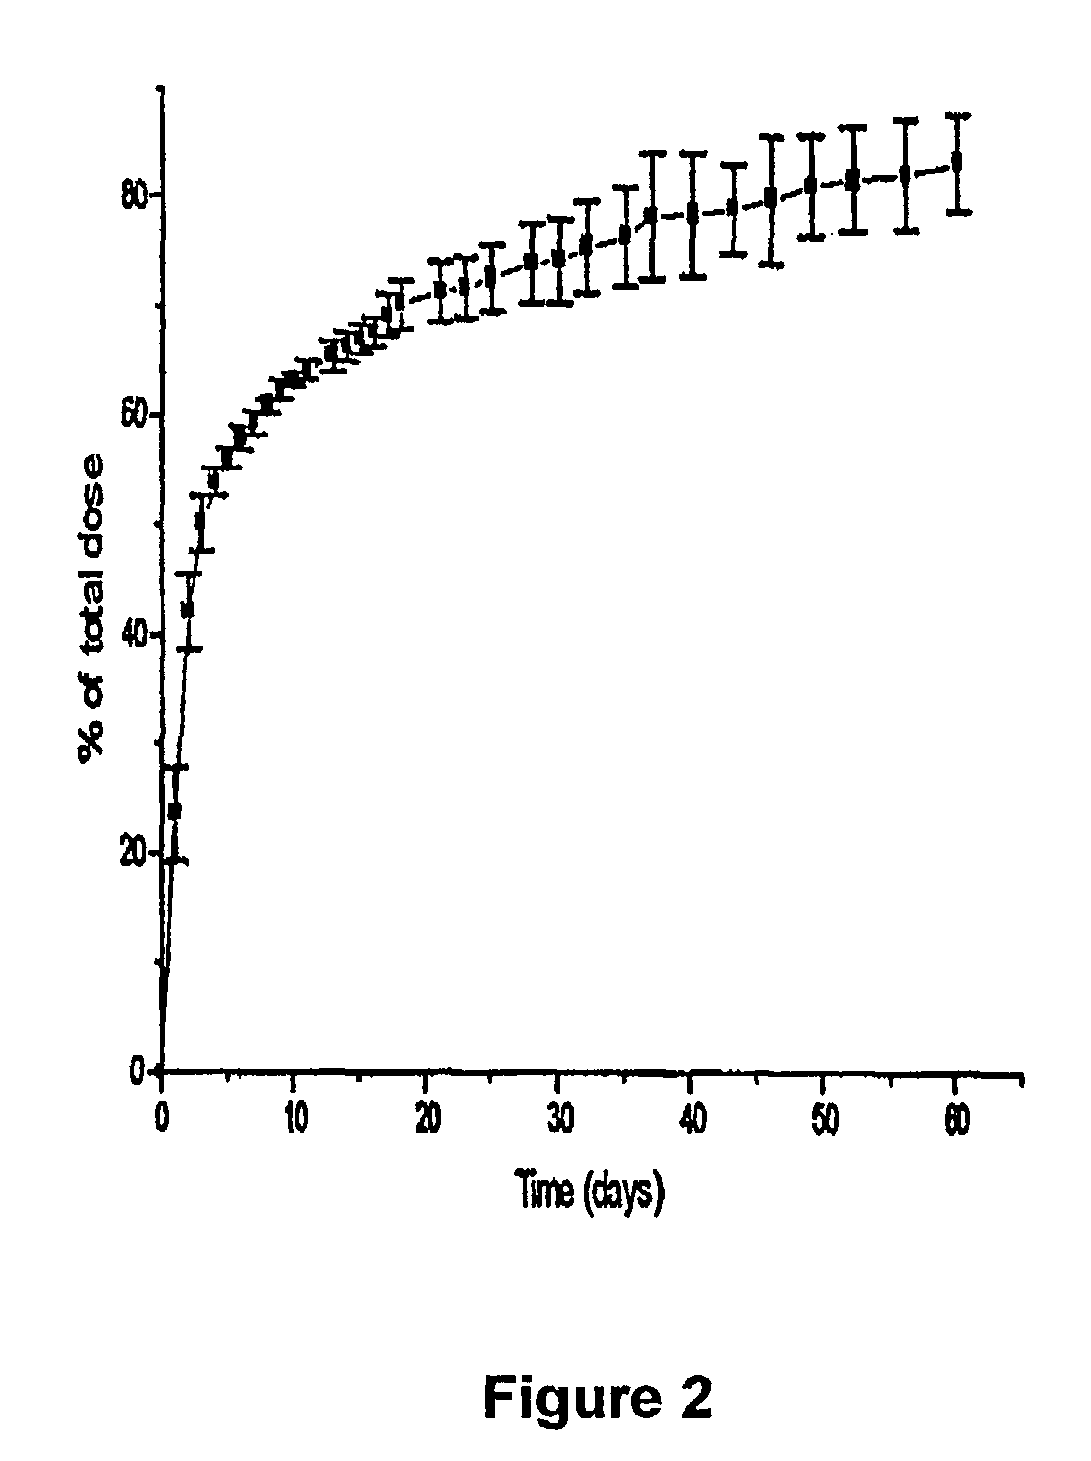 Slow release pharmaceutical preparation and method of administering same